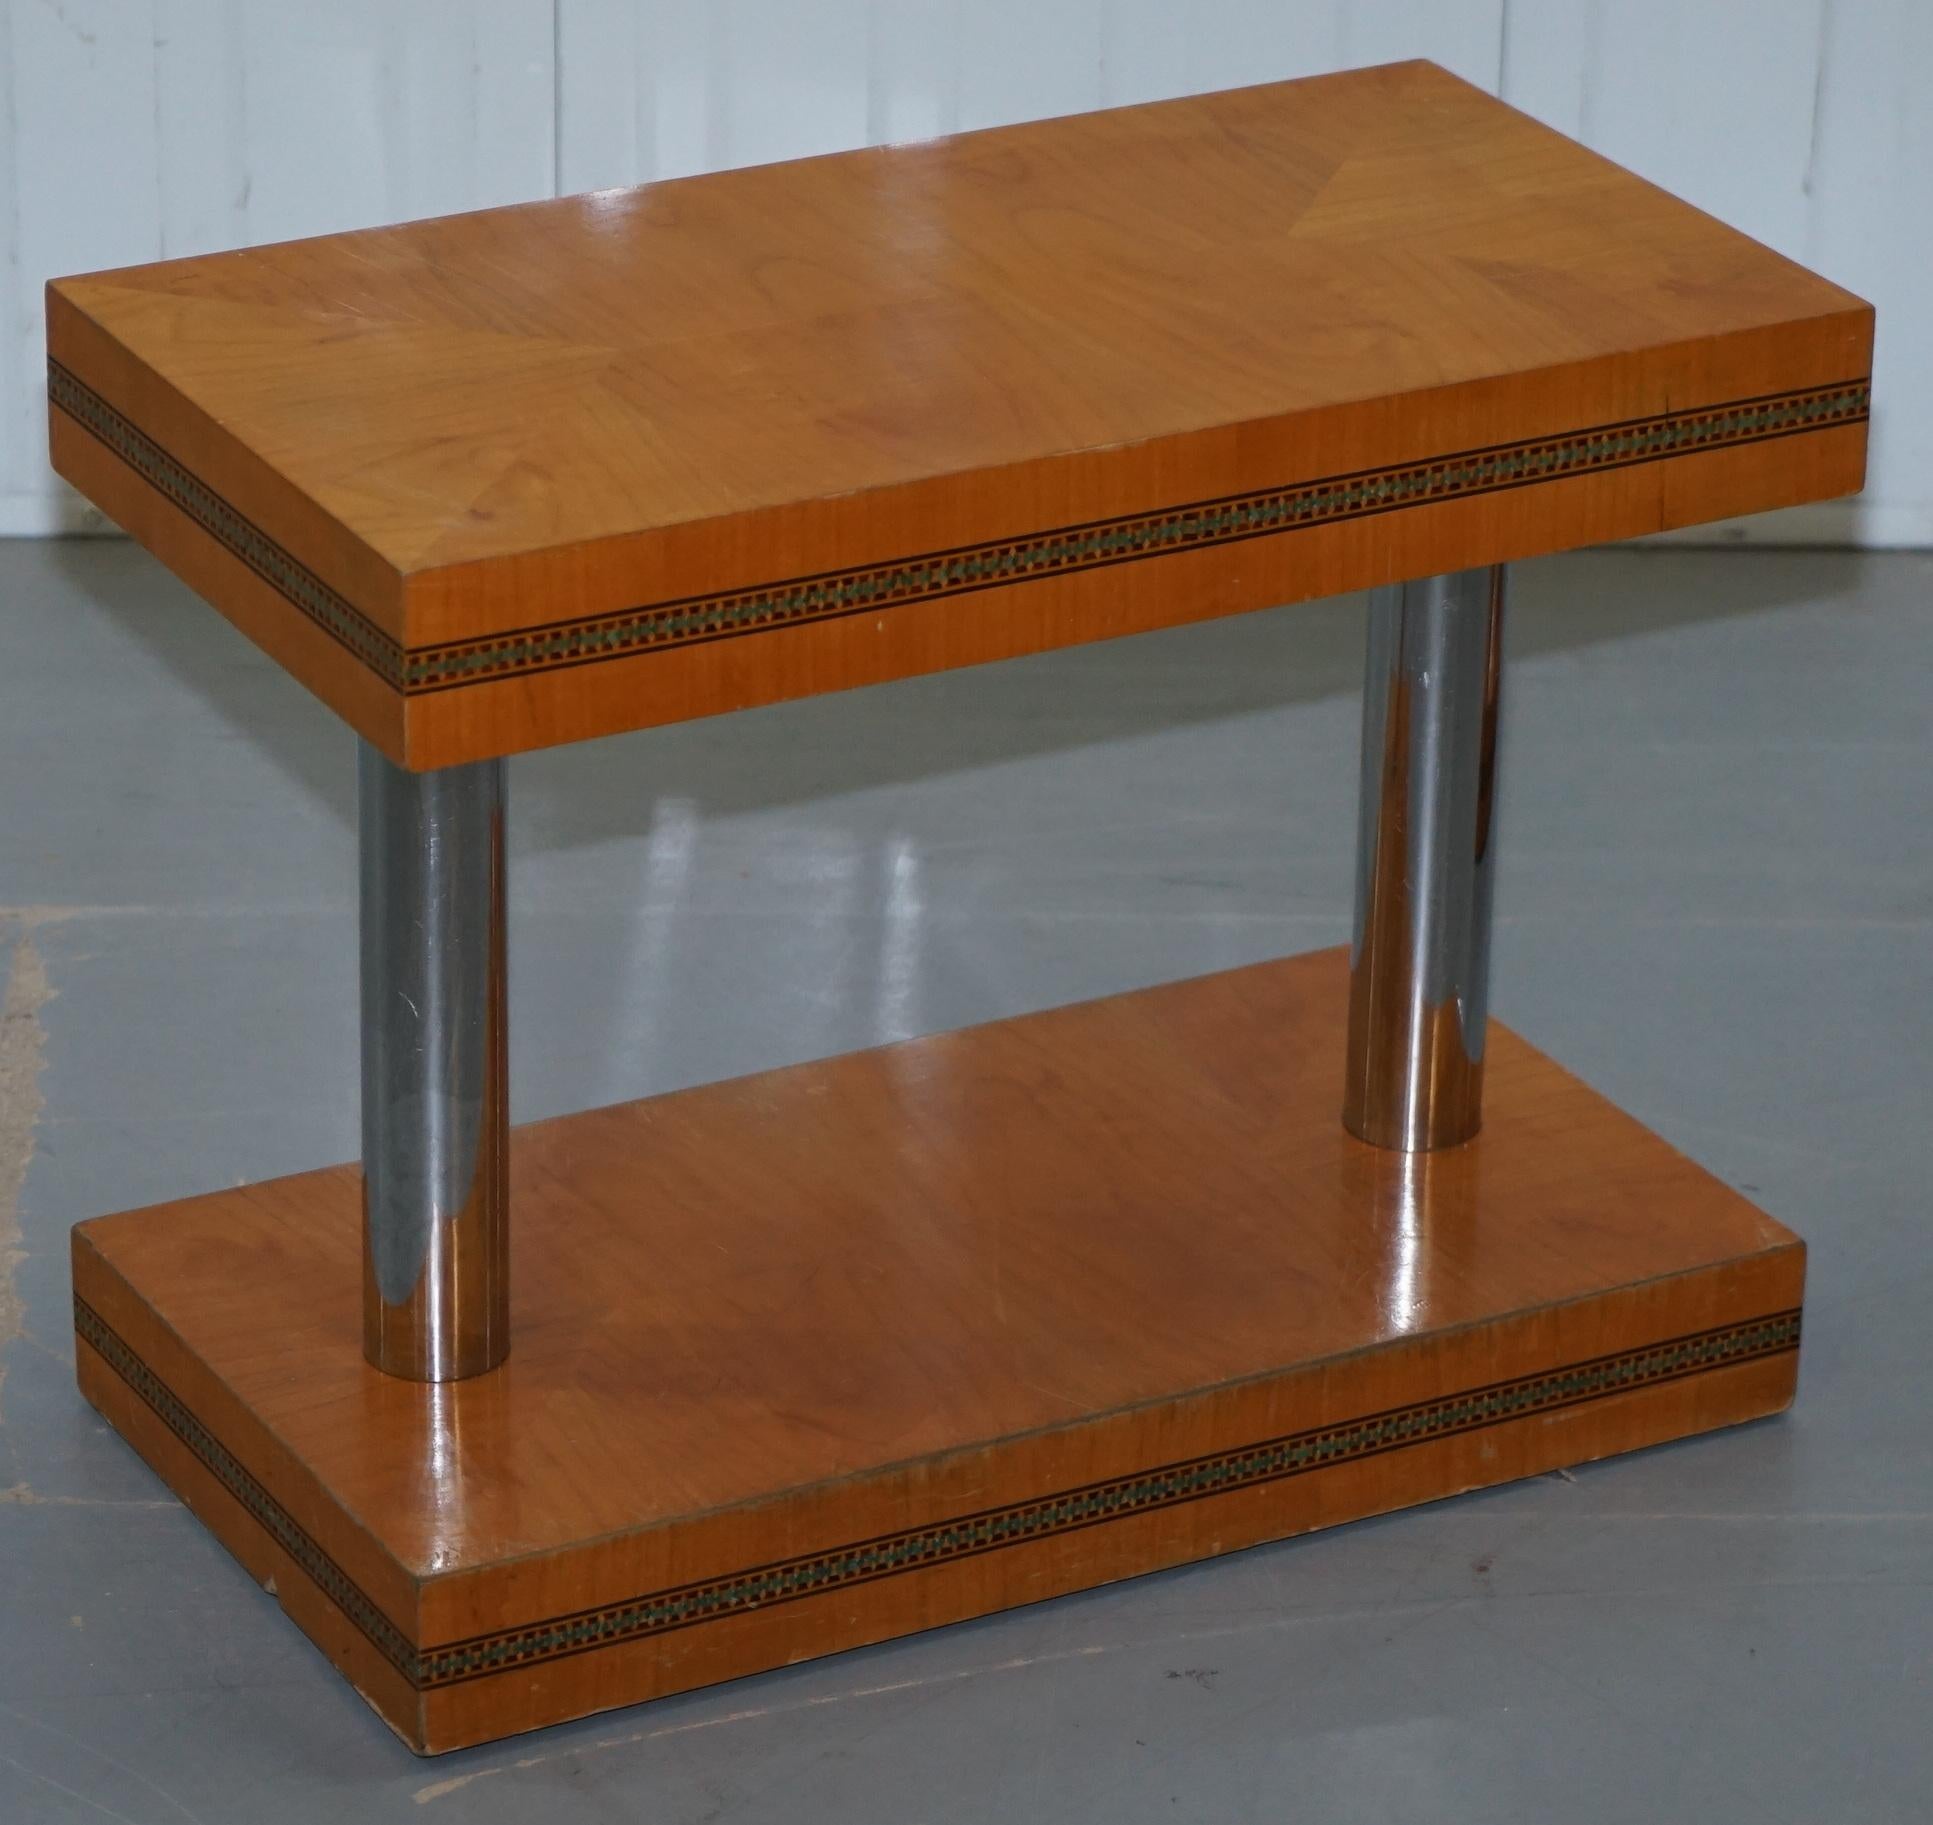 We are delighted to offer for sale this lovely pair of genuine mid-century modern Satinwood side tables with Chrome plated pillars

A very good looking and well made pair of side tables, they are quite large, if seated next to a sofa or armchair